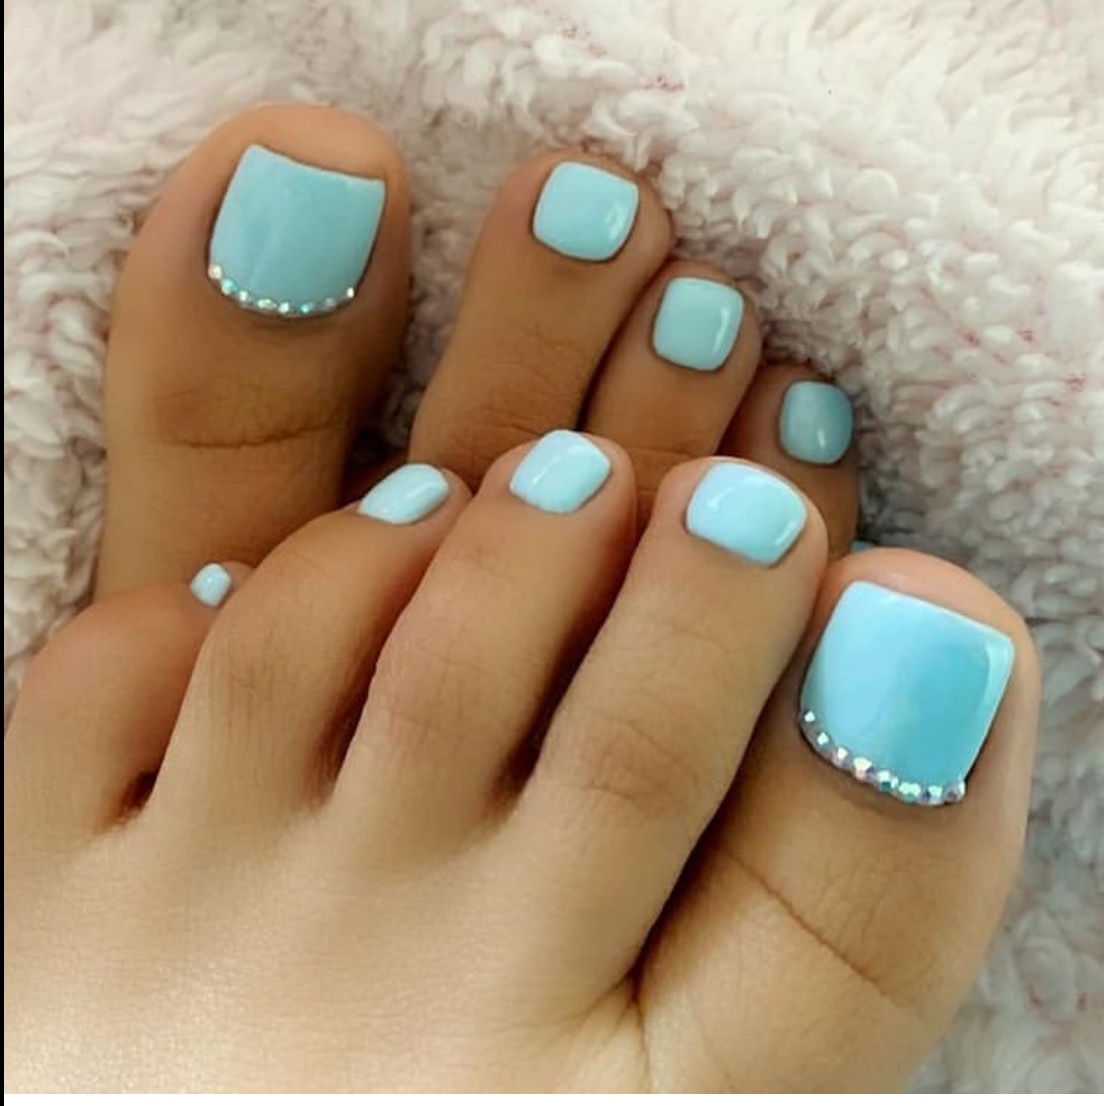 11 Of The Prettiest Summer Toe Nails - The Glossychic